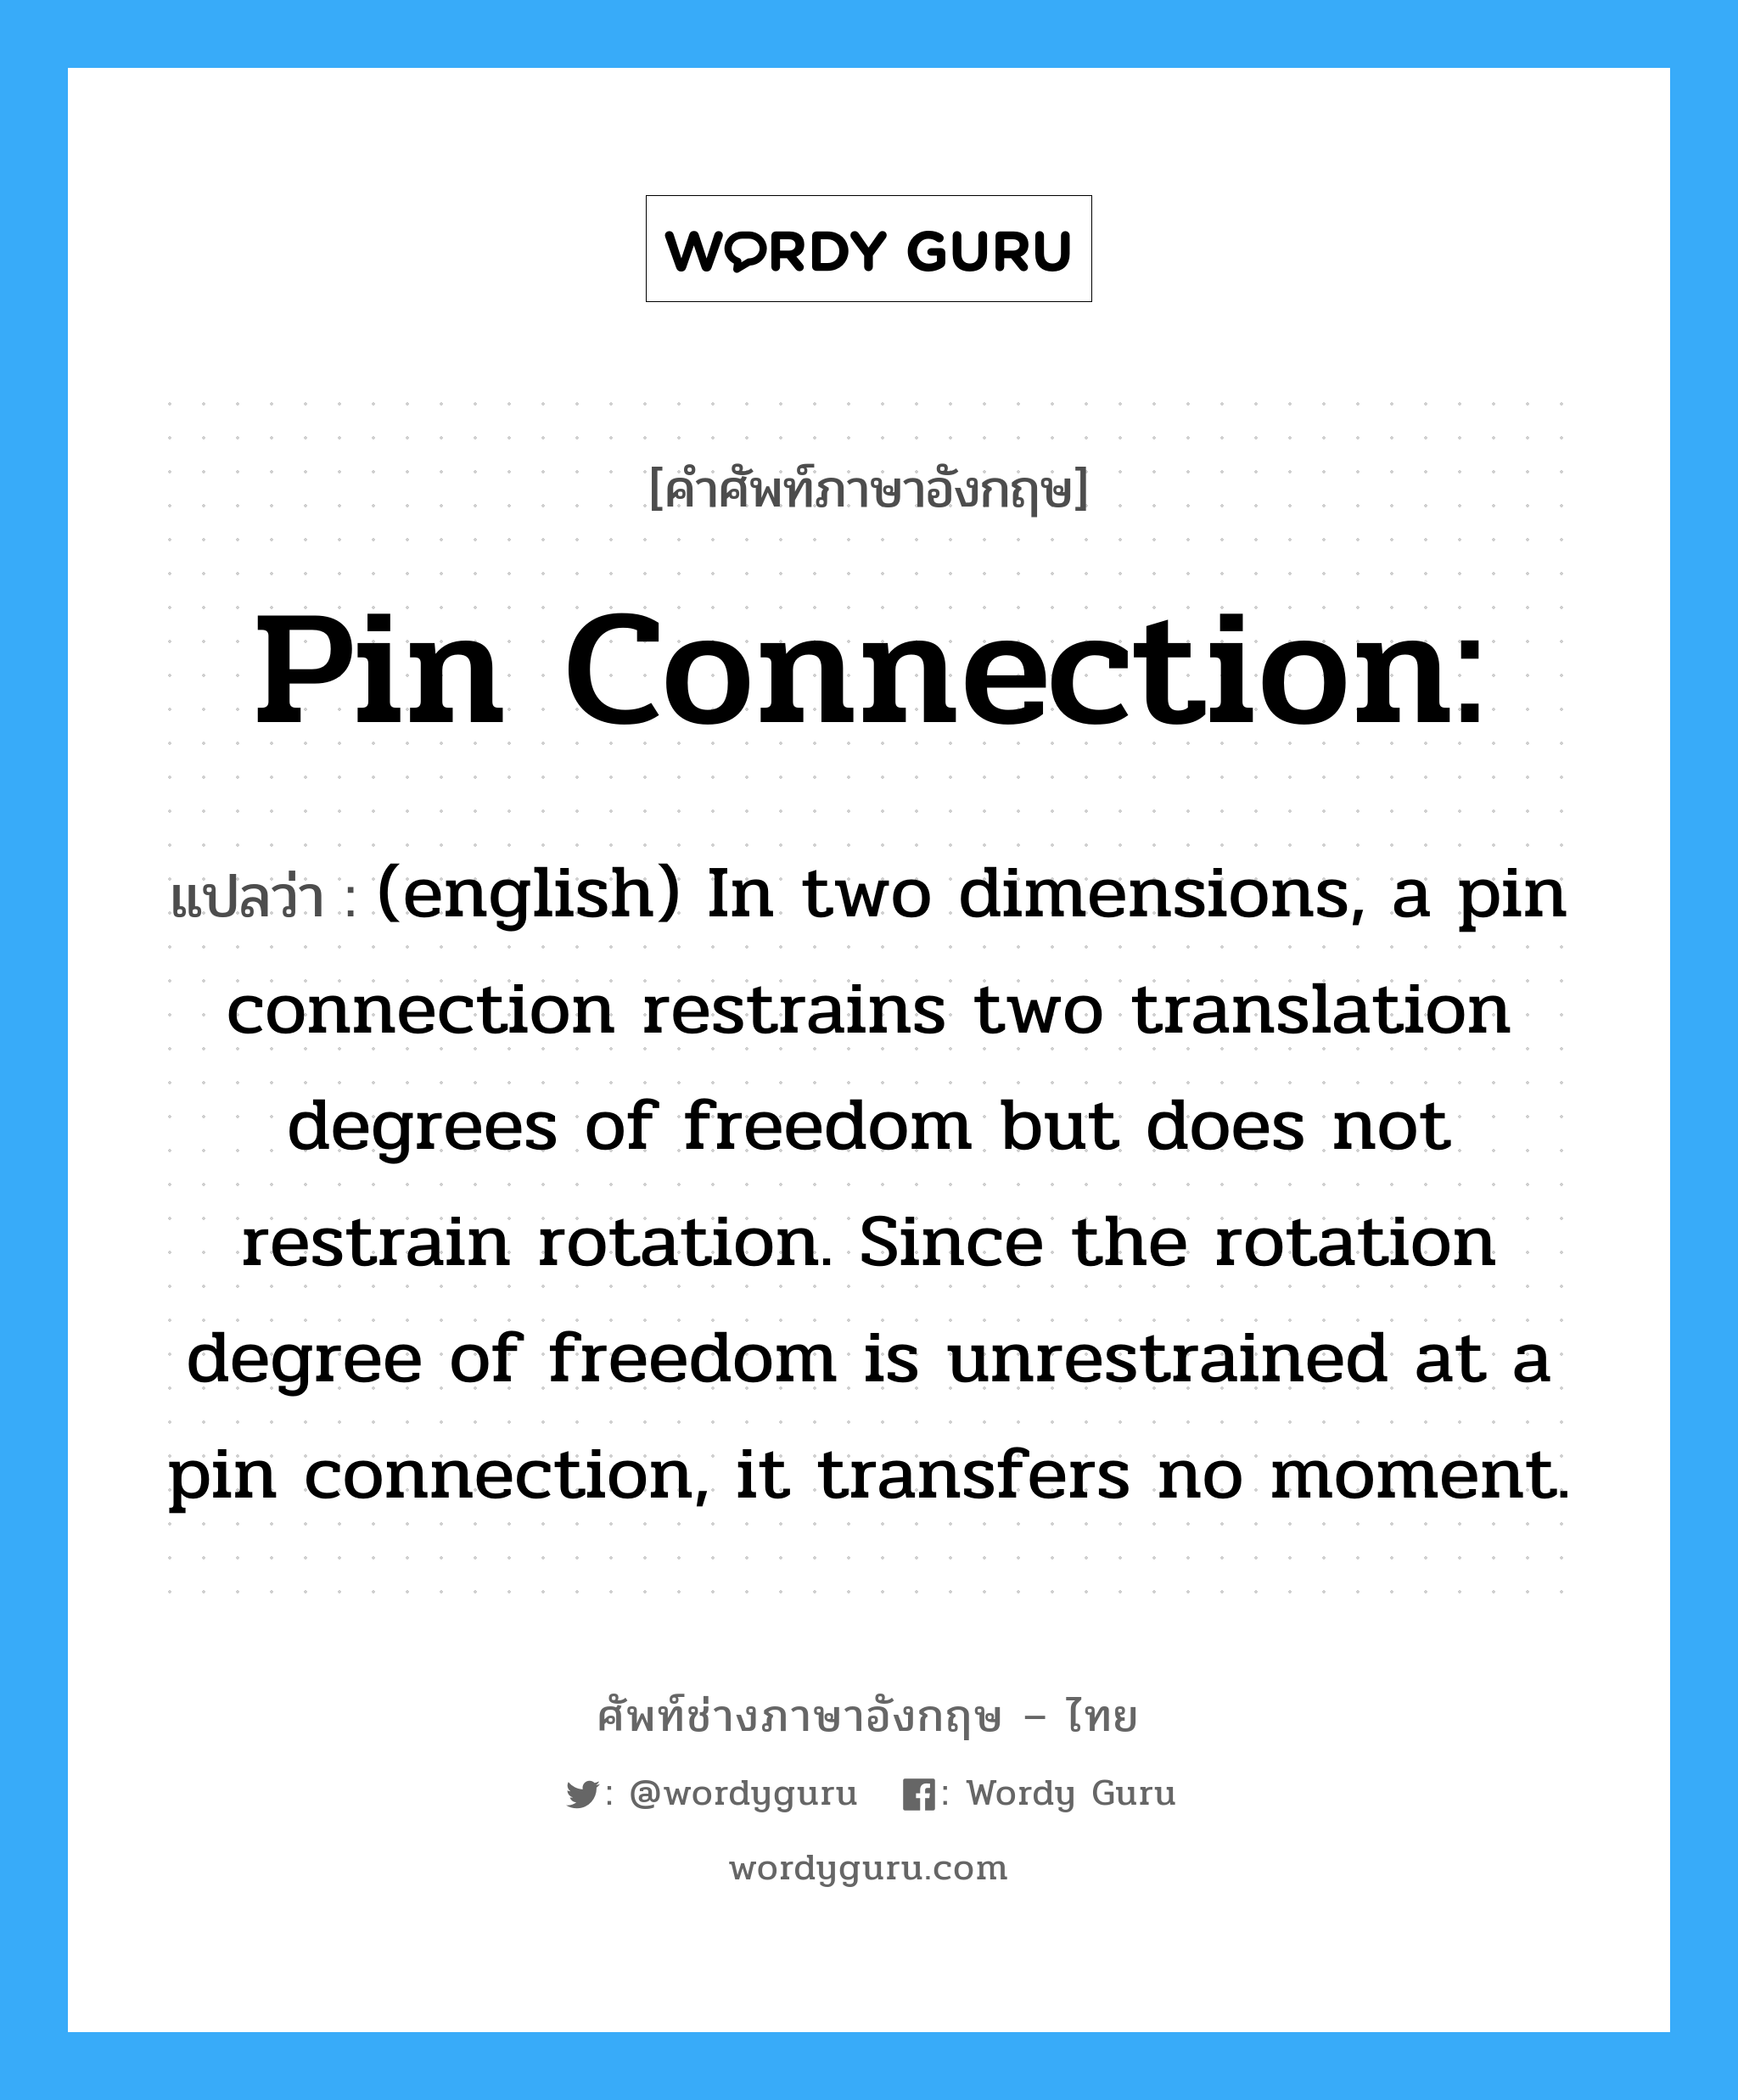 Pin connection: แปลว่า?, คำศัพท์ช่างภาษาอังกฤษ - ไทย Pin connection: คำศัพท์ภาษาอังกฤษ Pin connection: แปลว่า (english) In two dimensions, a pin connection restrains two translation degrees of freedom but does not restrain rotation. Since the rotation degree of freedom is unrestrained at a pin connection, it transfers no moment.